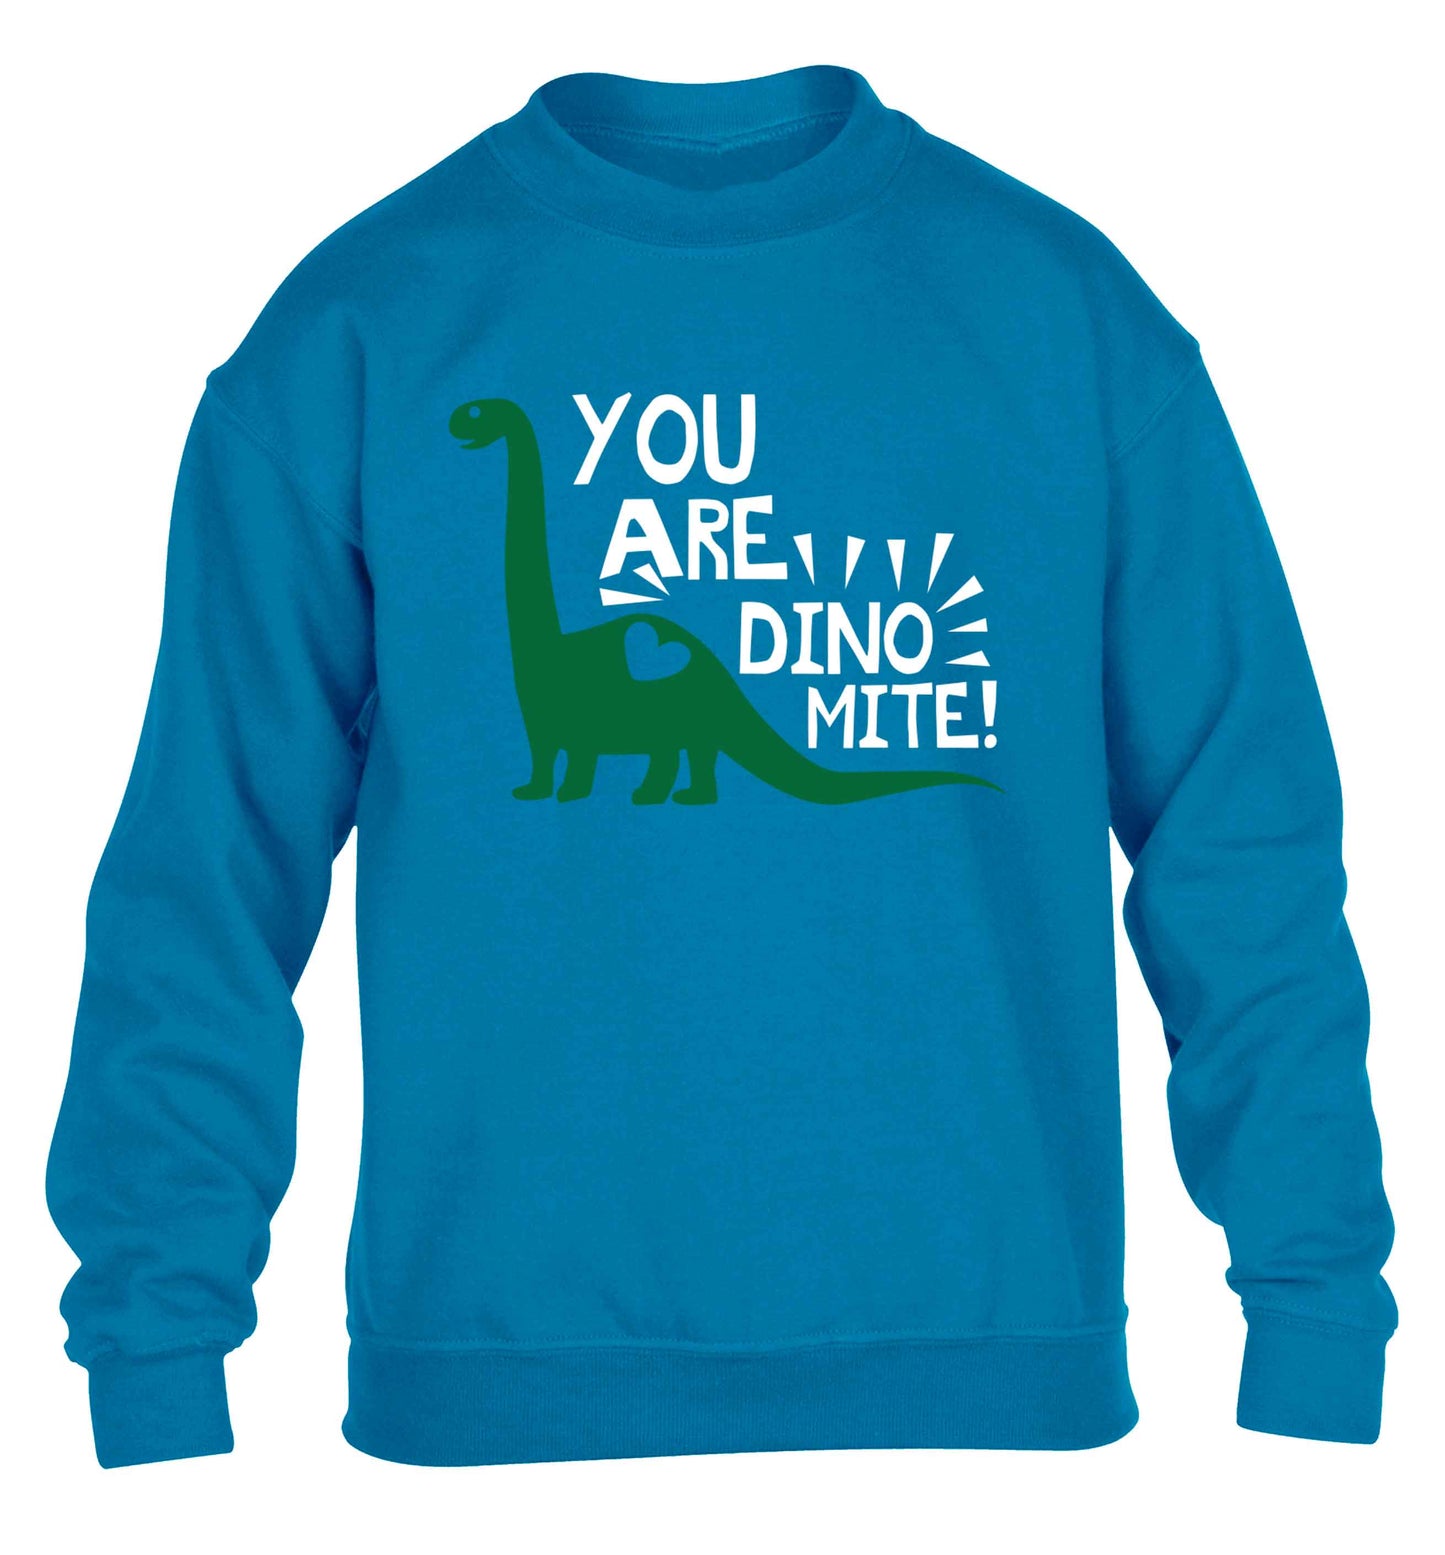 You are dinomite! children's blue sweater 12-13 Years